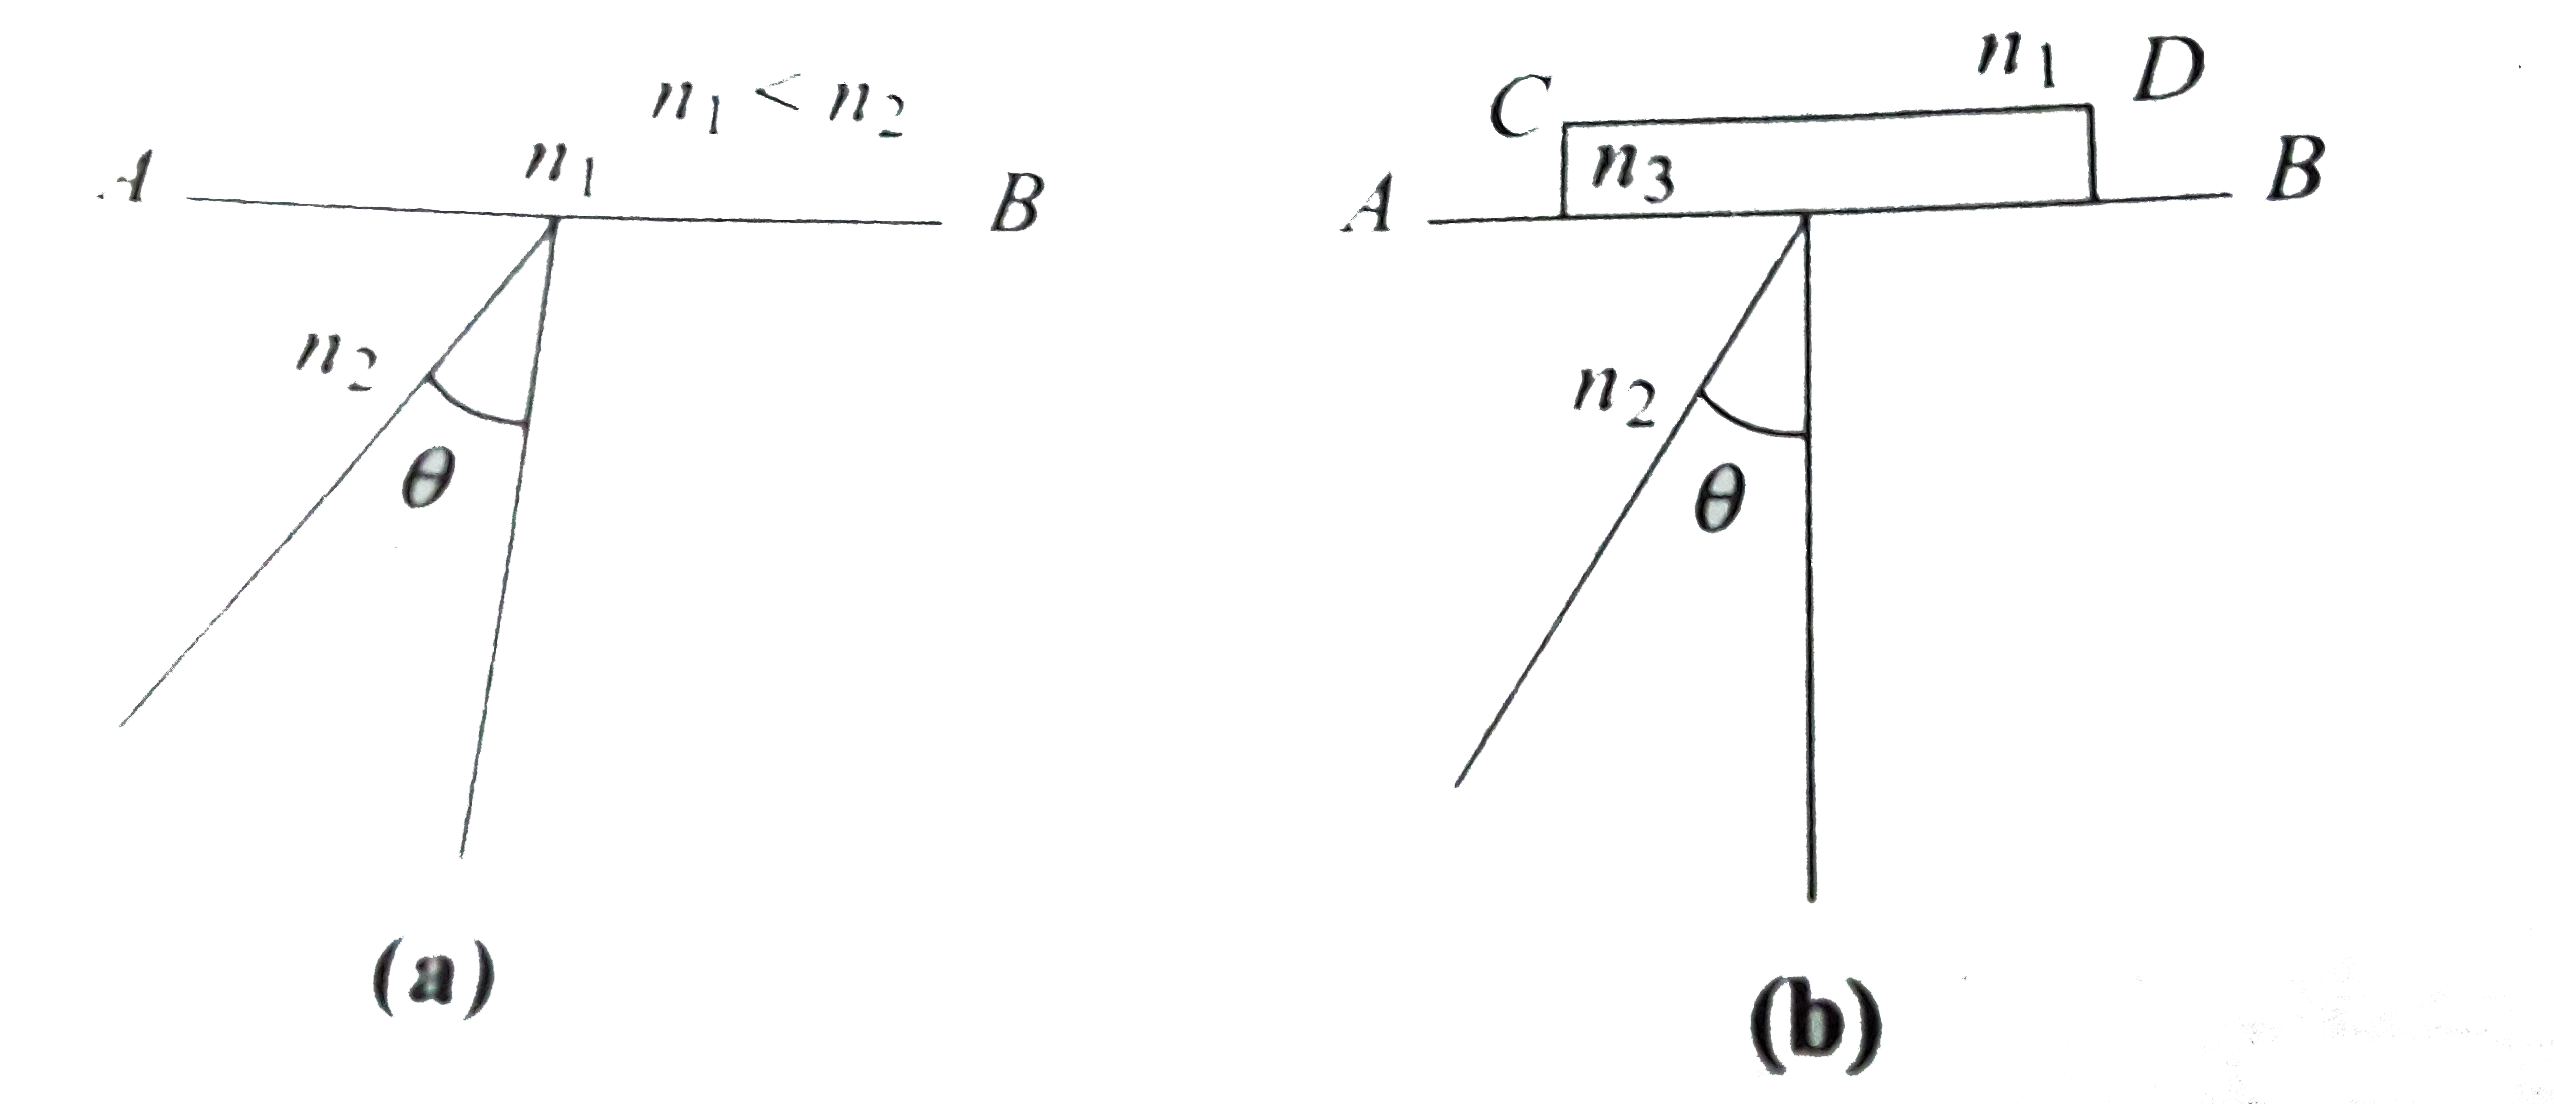 In Figure, light is incident at an angle theta which is slightly greater than the critical angle. Now, keeping the incident angle fixed a parallel slab or refractive index n(3) is placed on surface AB. Which of the following statements are correct?